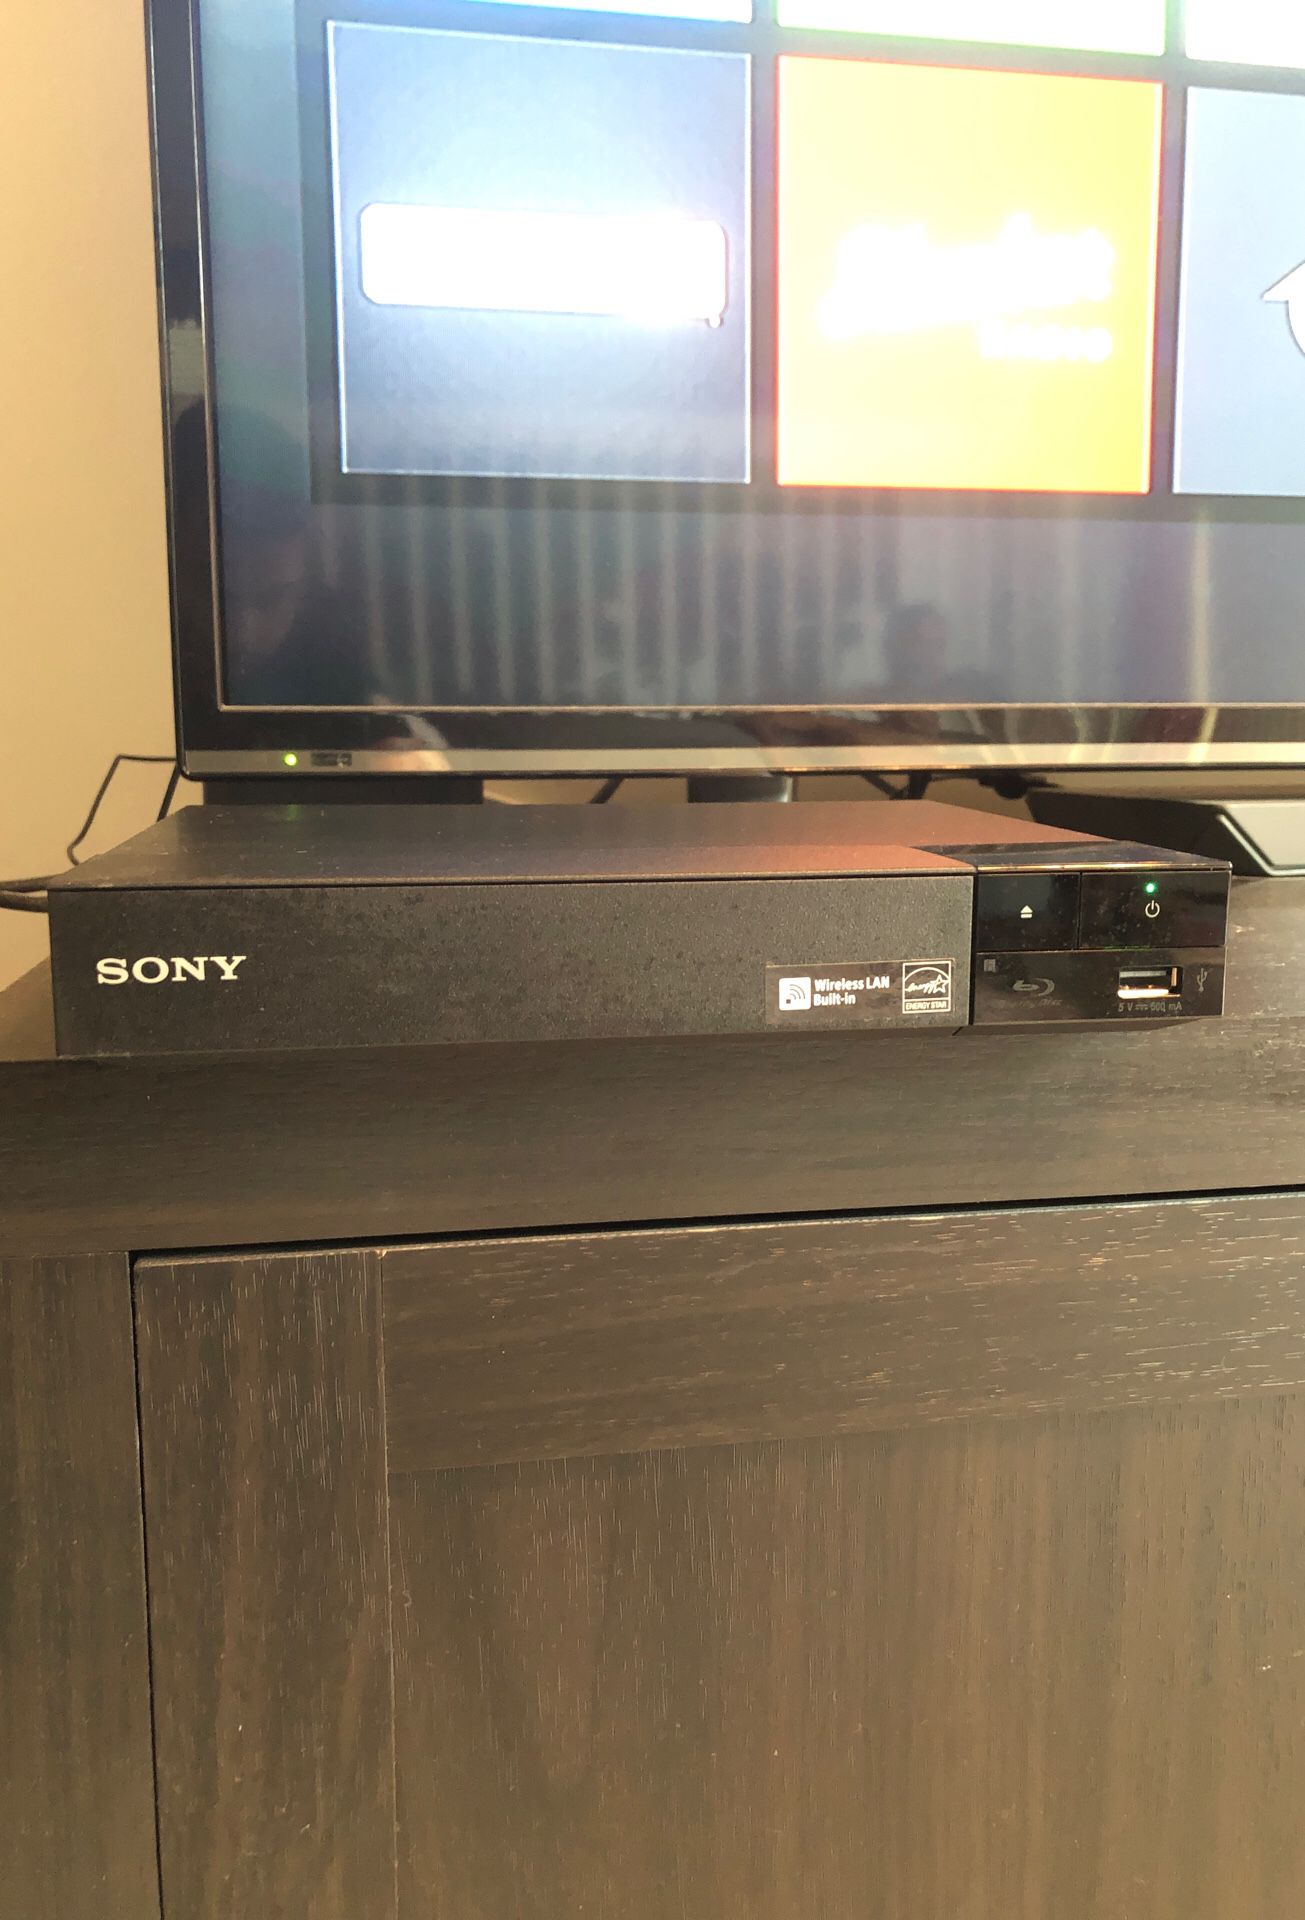 Sony Blu-ray player with built in Netflix